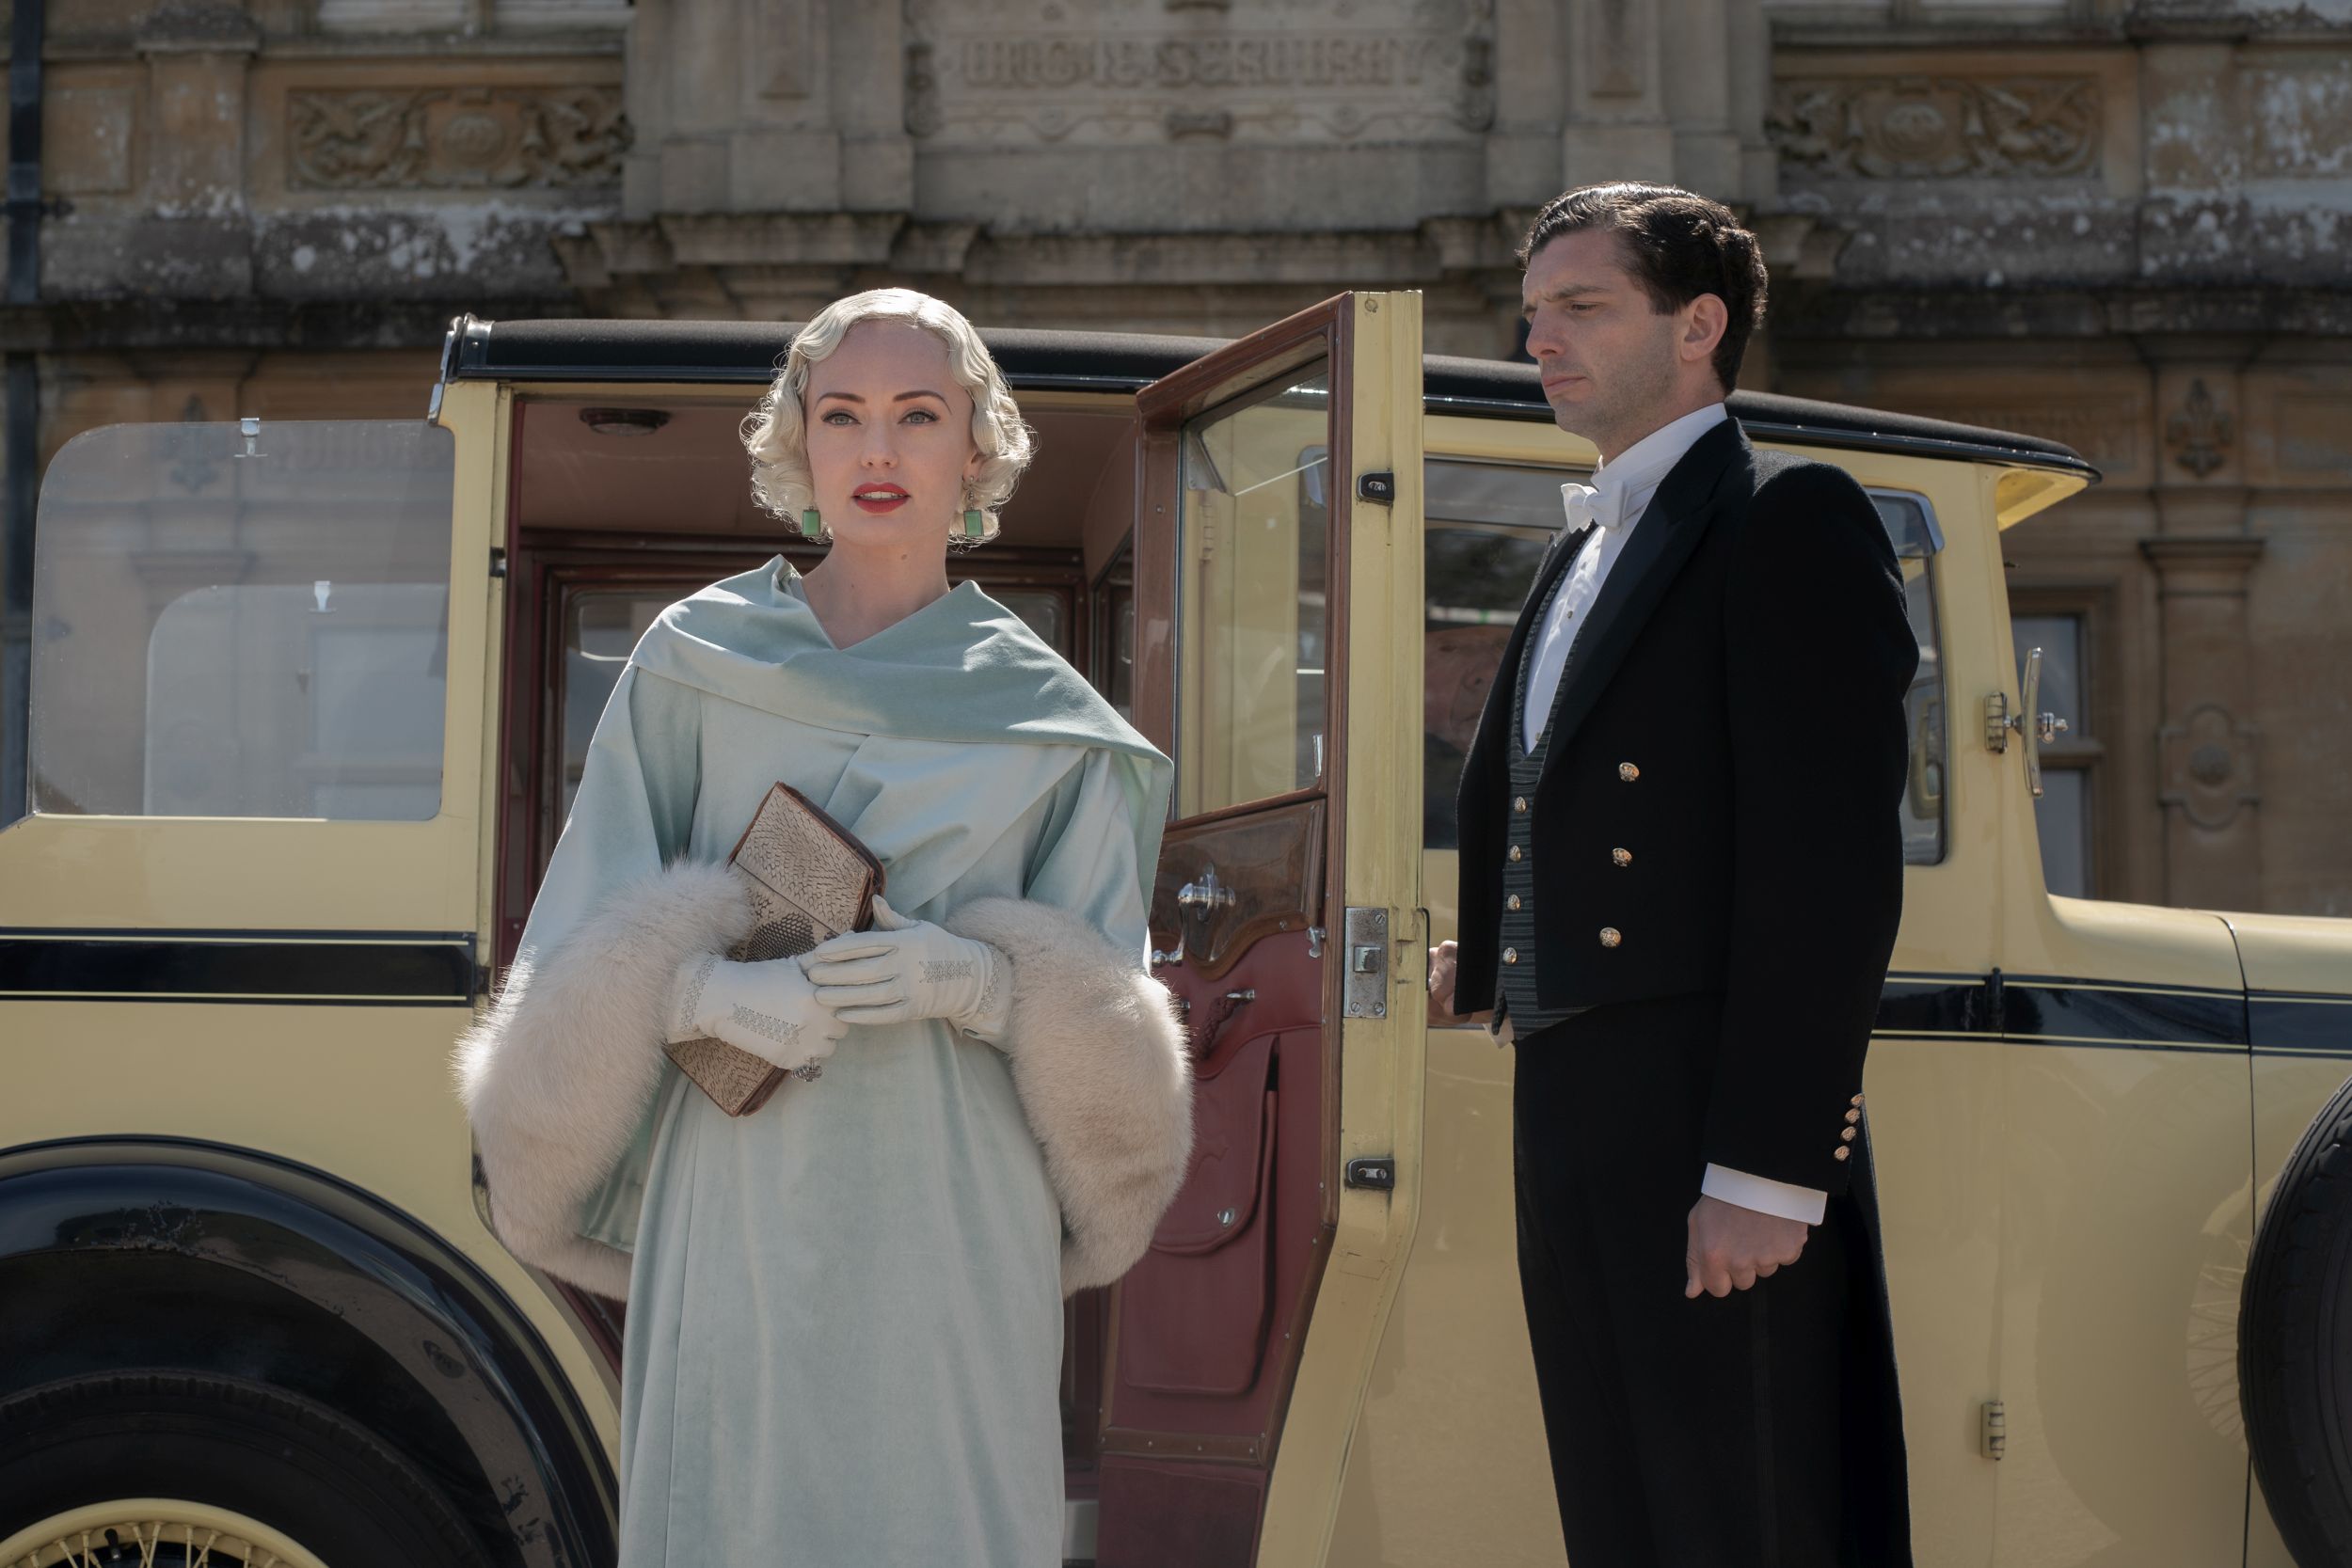 Laura Haddock stars as Myrna Dalgleish and Michael Fox as Andy in DOWNTON ABBEY: A New Era